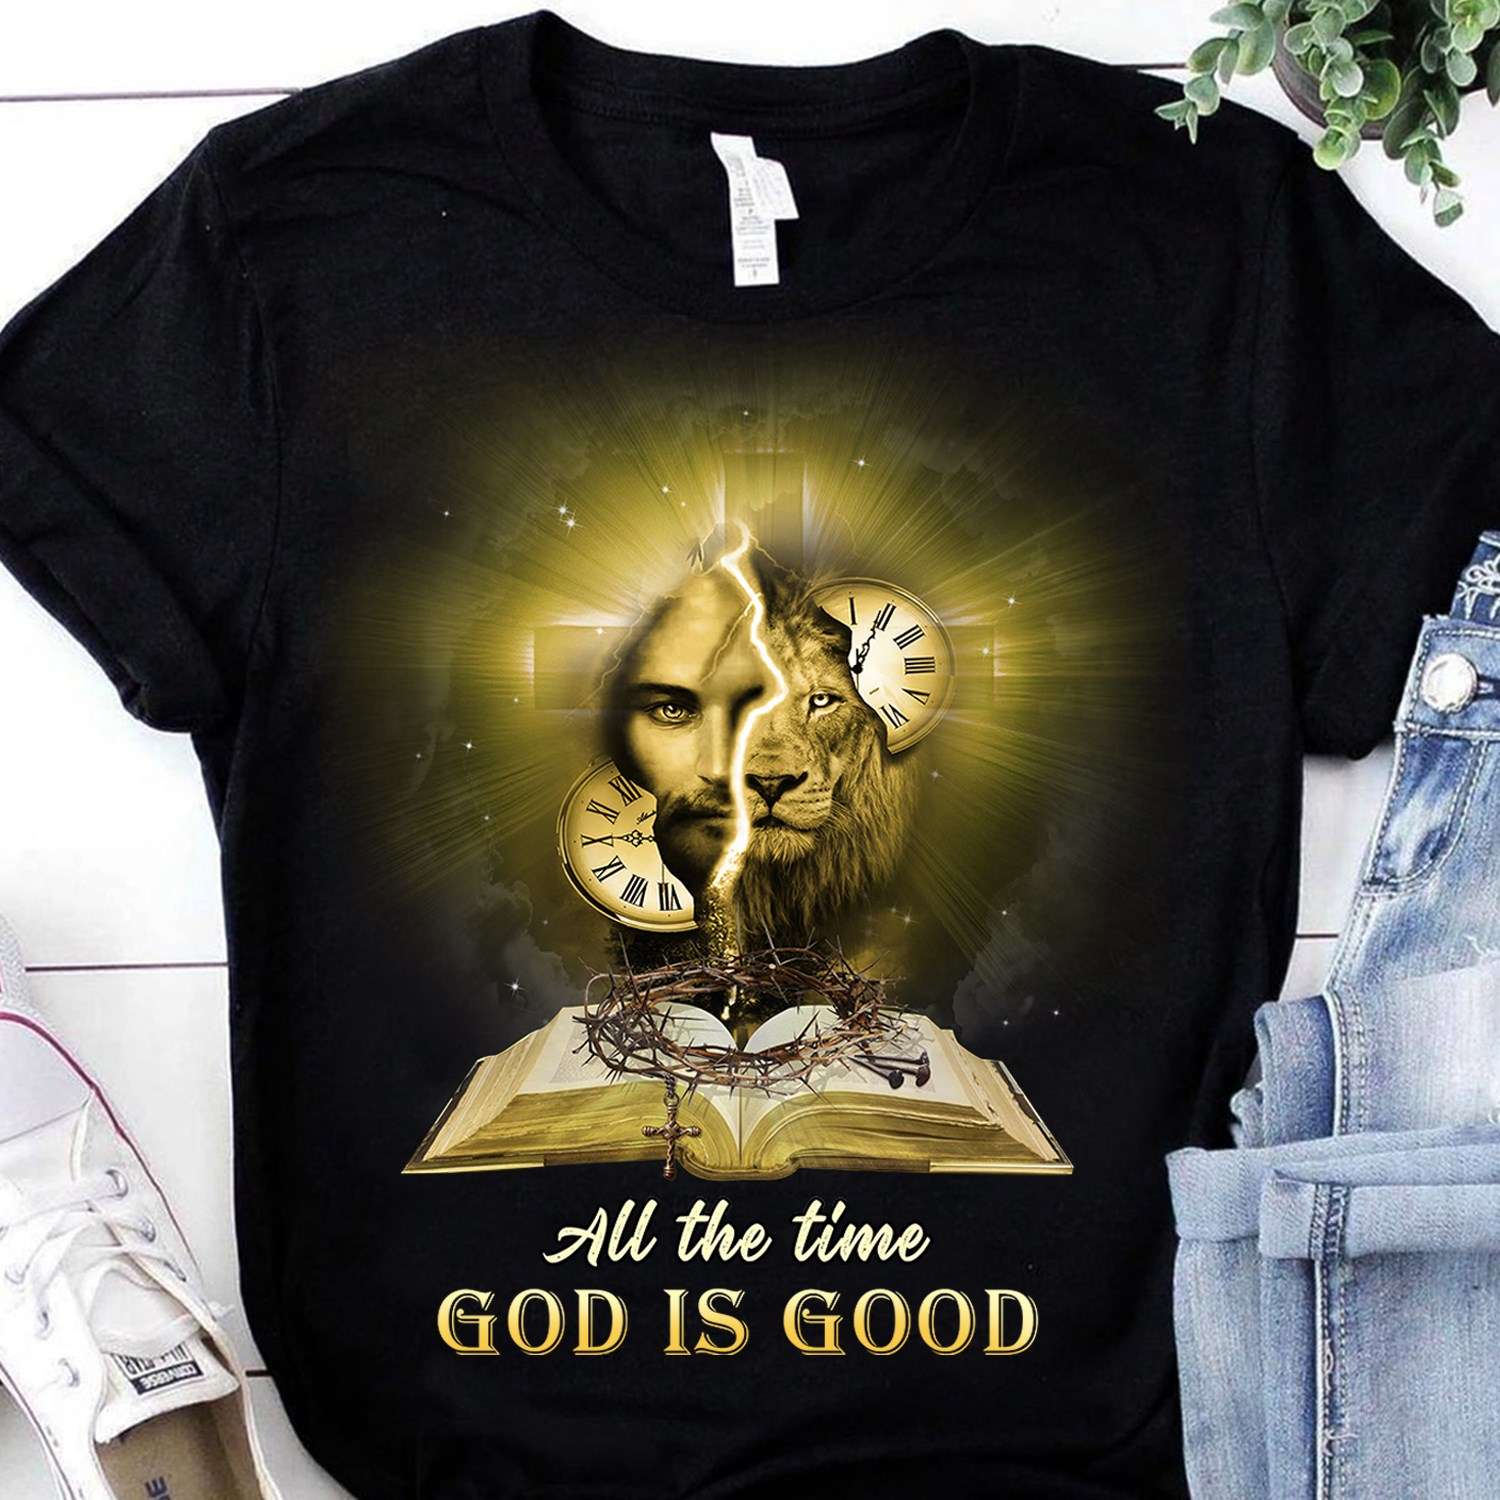 All the time God is good - Lion and God, Jesus Holy Bible, Believe in Jesus